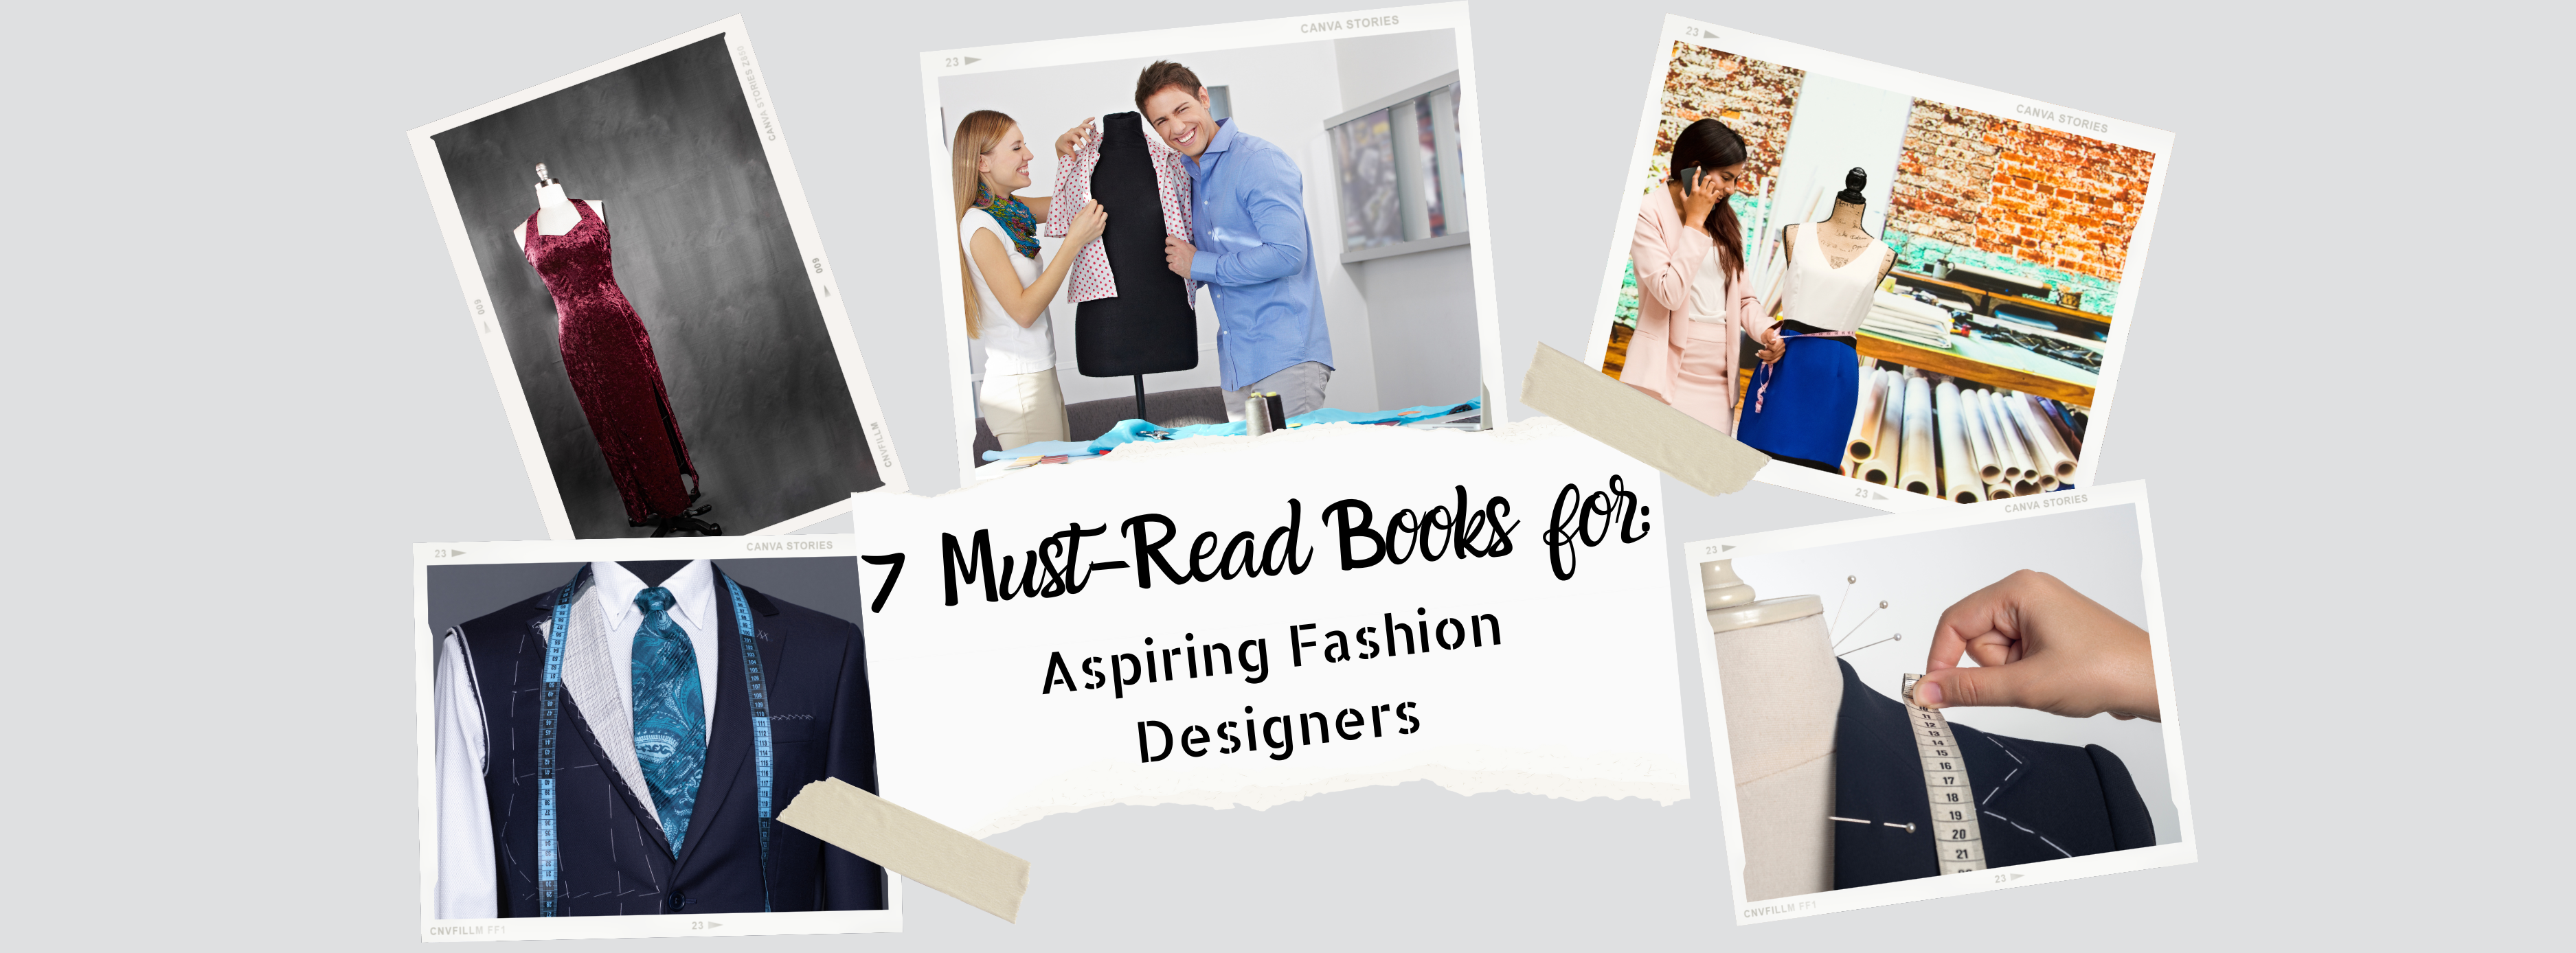 Creating a Successful Fashion Collection Book Review - Fashionista Sketch